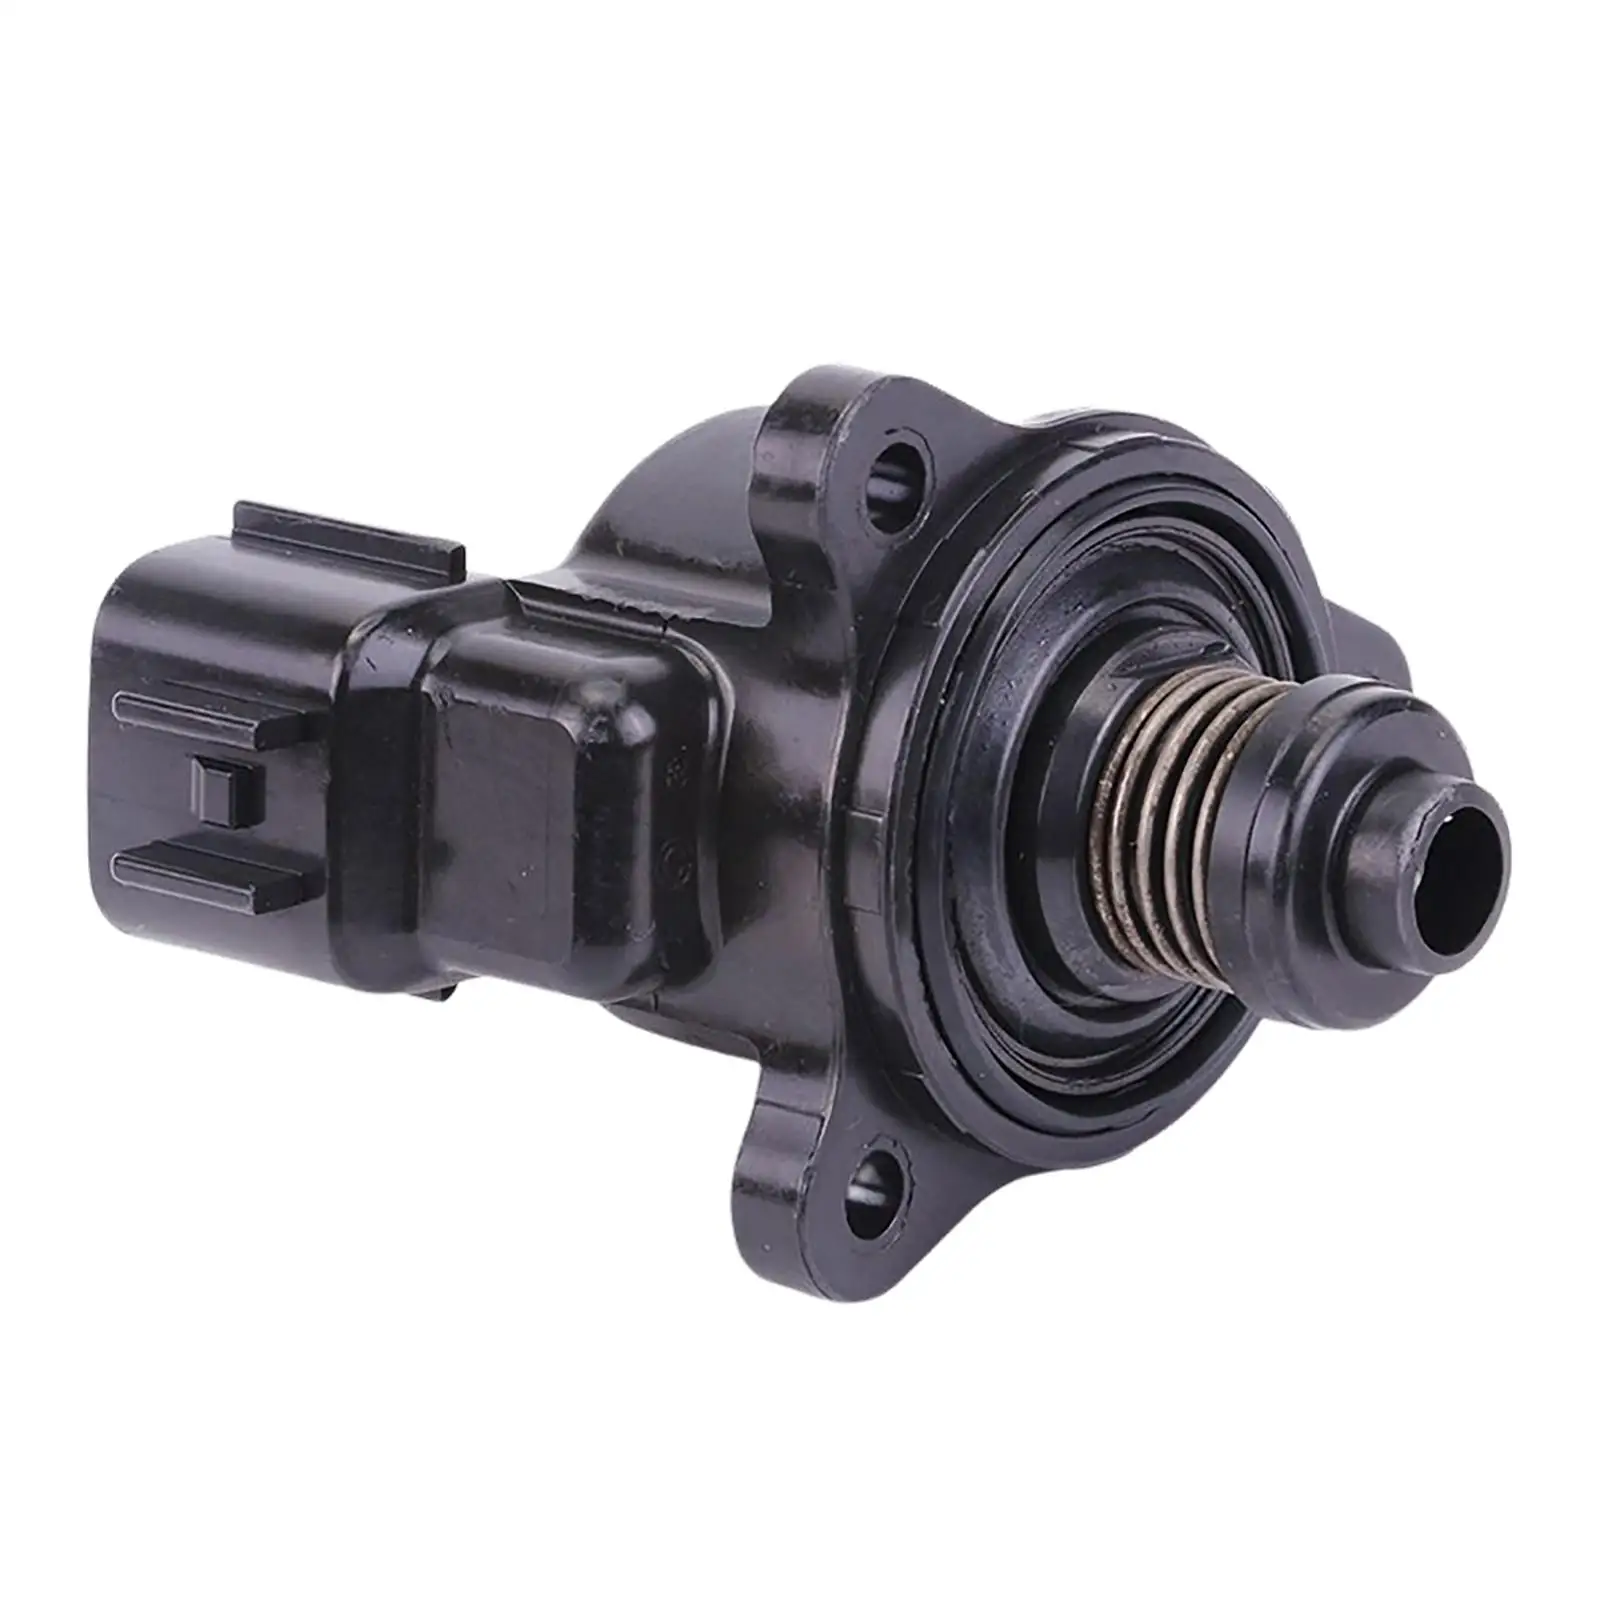 Idle Air Speed Control Valve 68V-1312A-00-00 Auto Parts Car Accessories Motor for Outboard